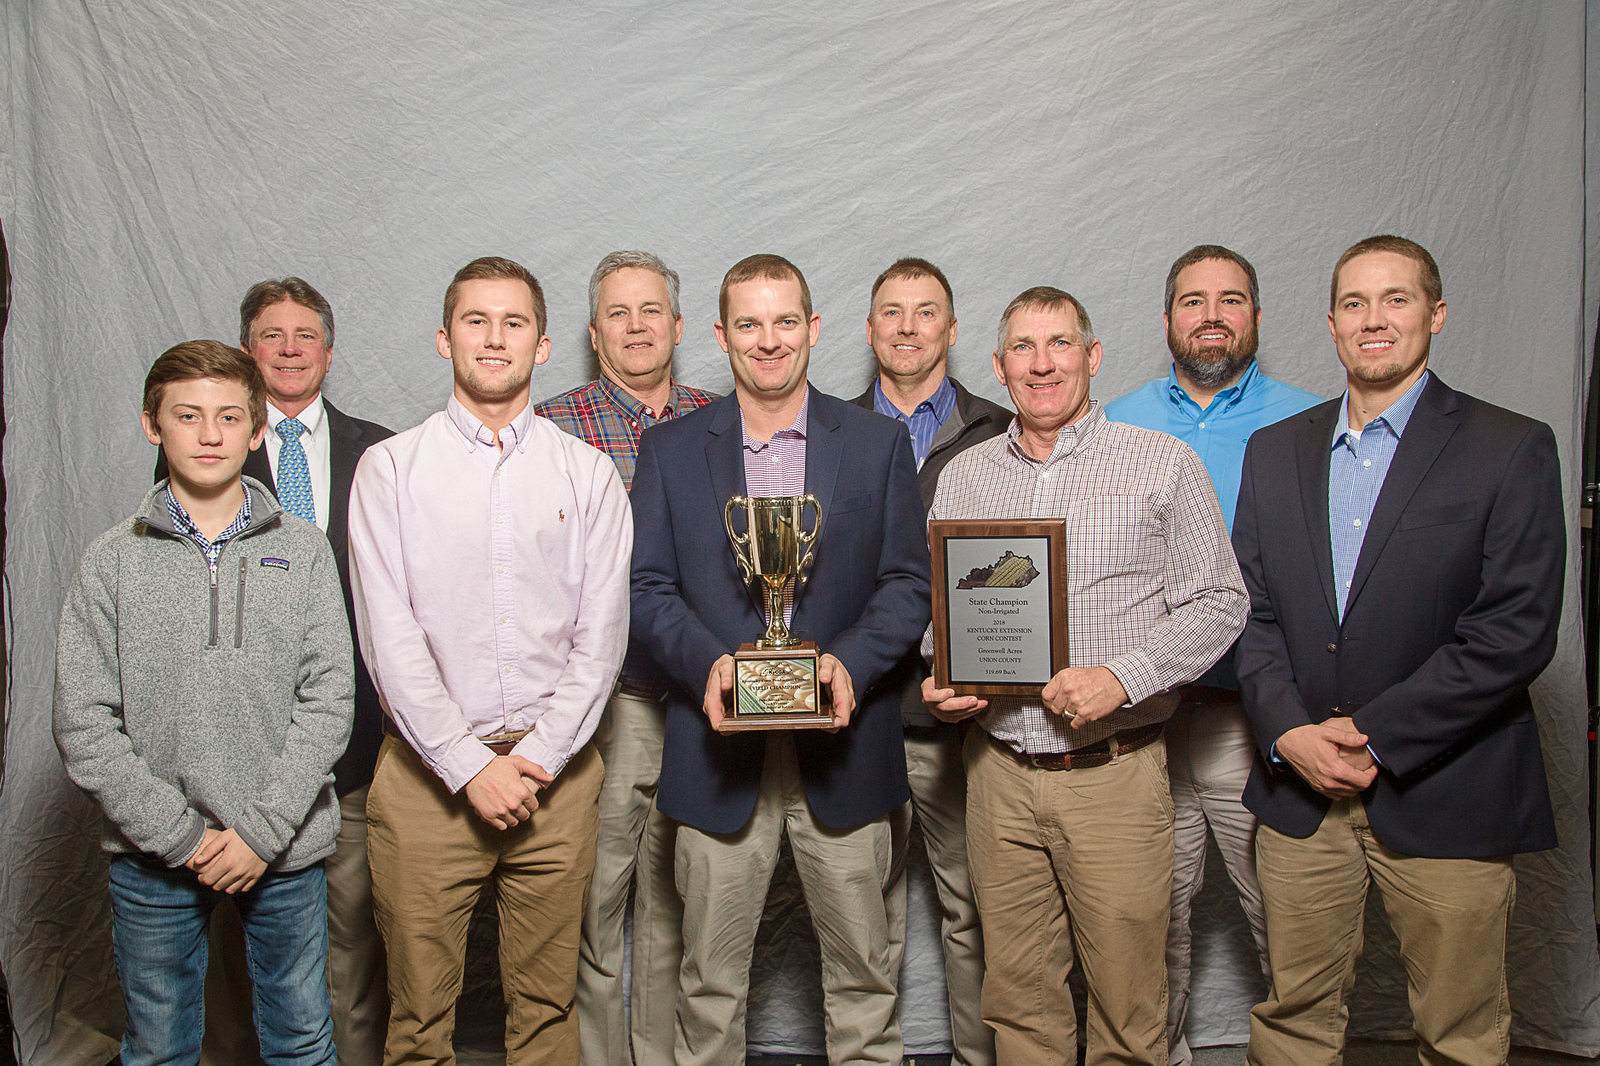 Greenwell Acres will be honored again this year at the Kentucky Commodity Conference on January 17 along with the other winners listed below.